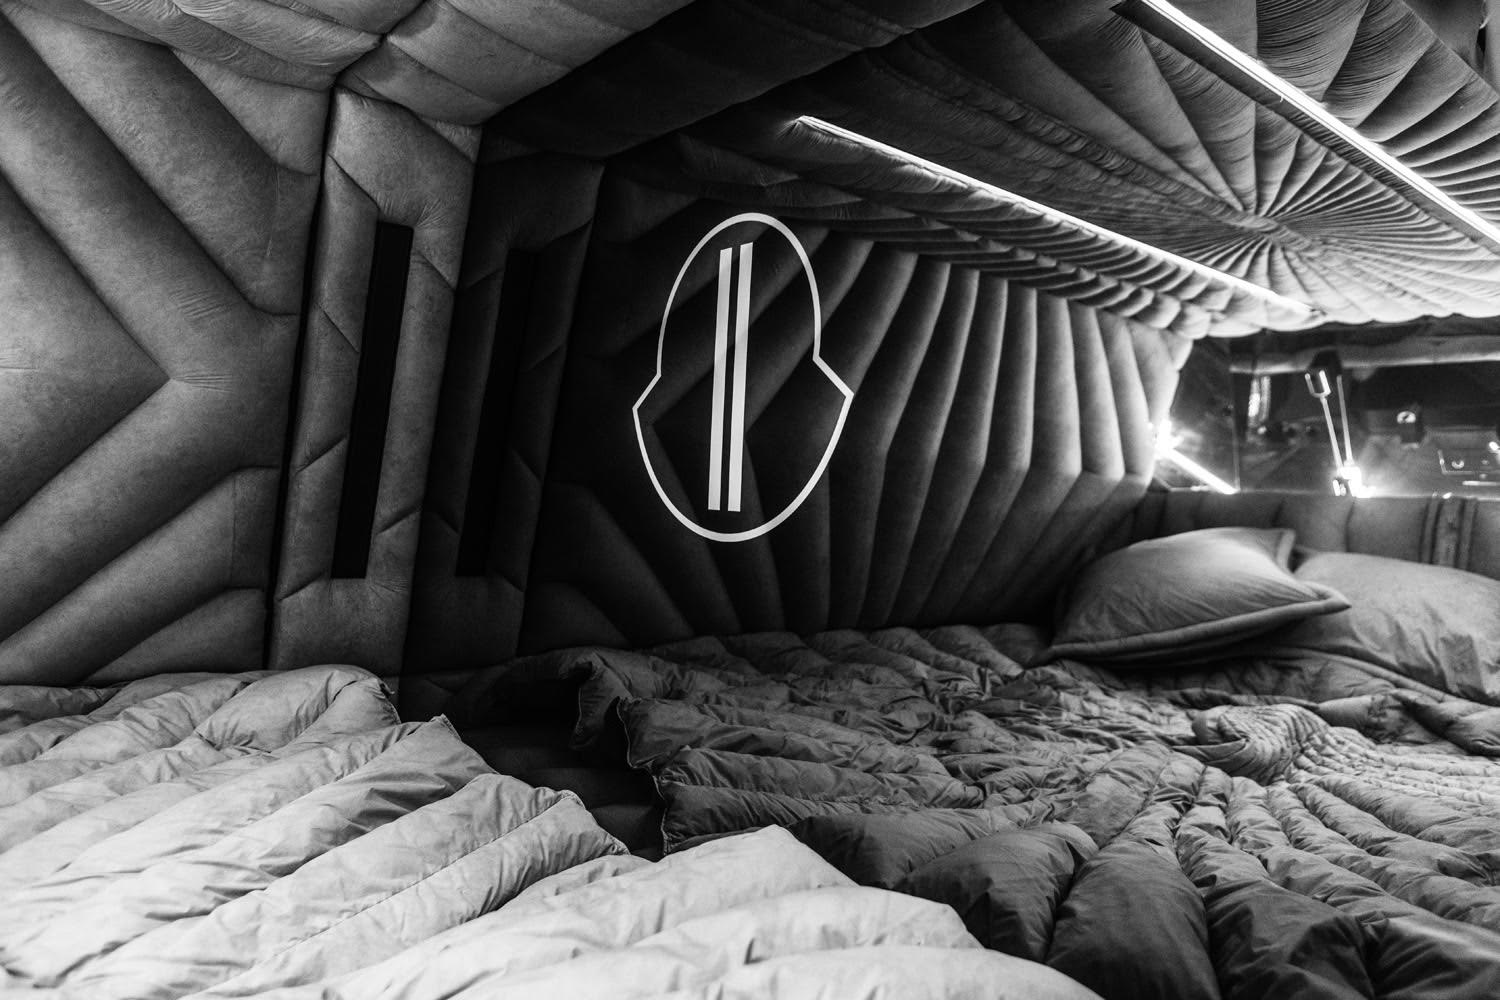 The Rick Owens x Moncler Silent Sleeping Pod Is the Next Evolution